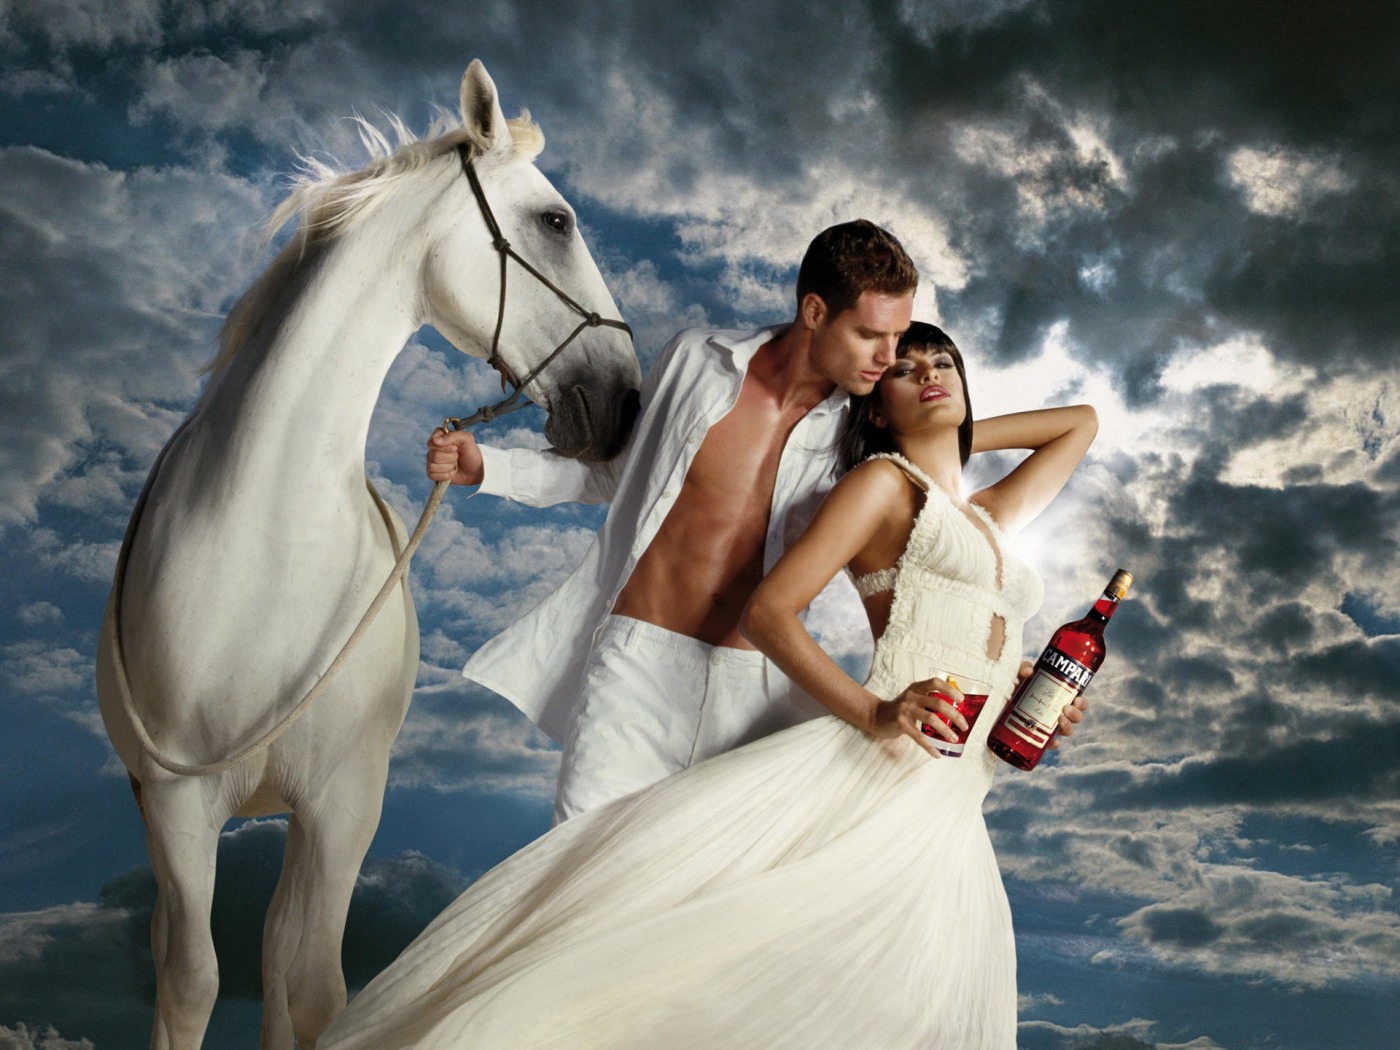 Campari Advertising Eva Mendes with Handsome Man And Horse